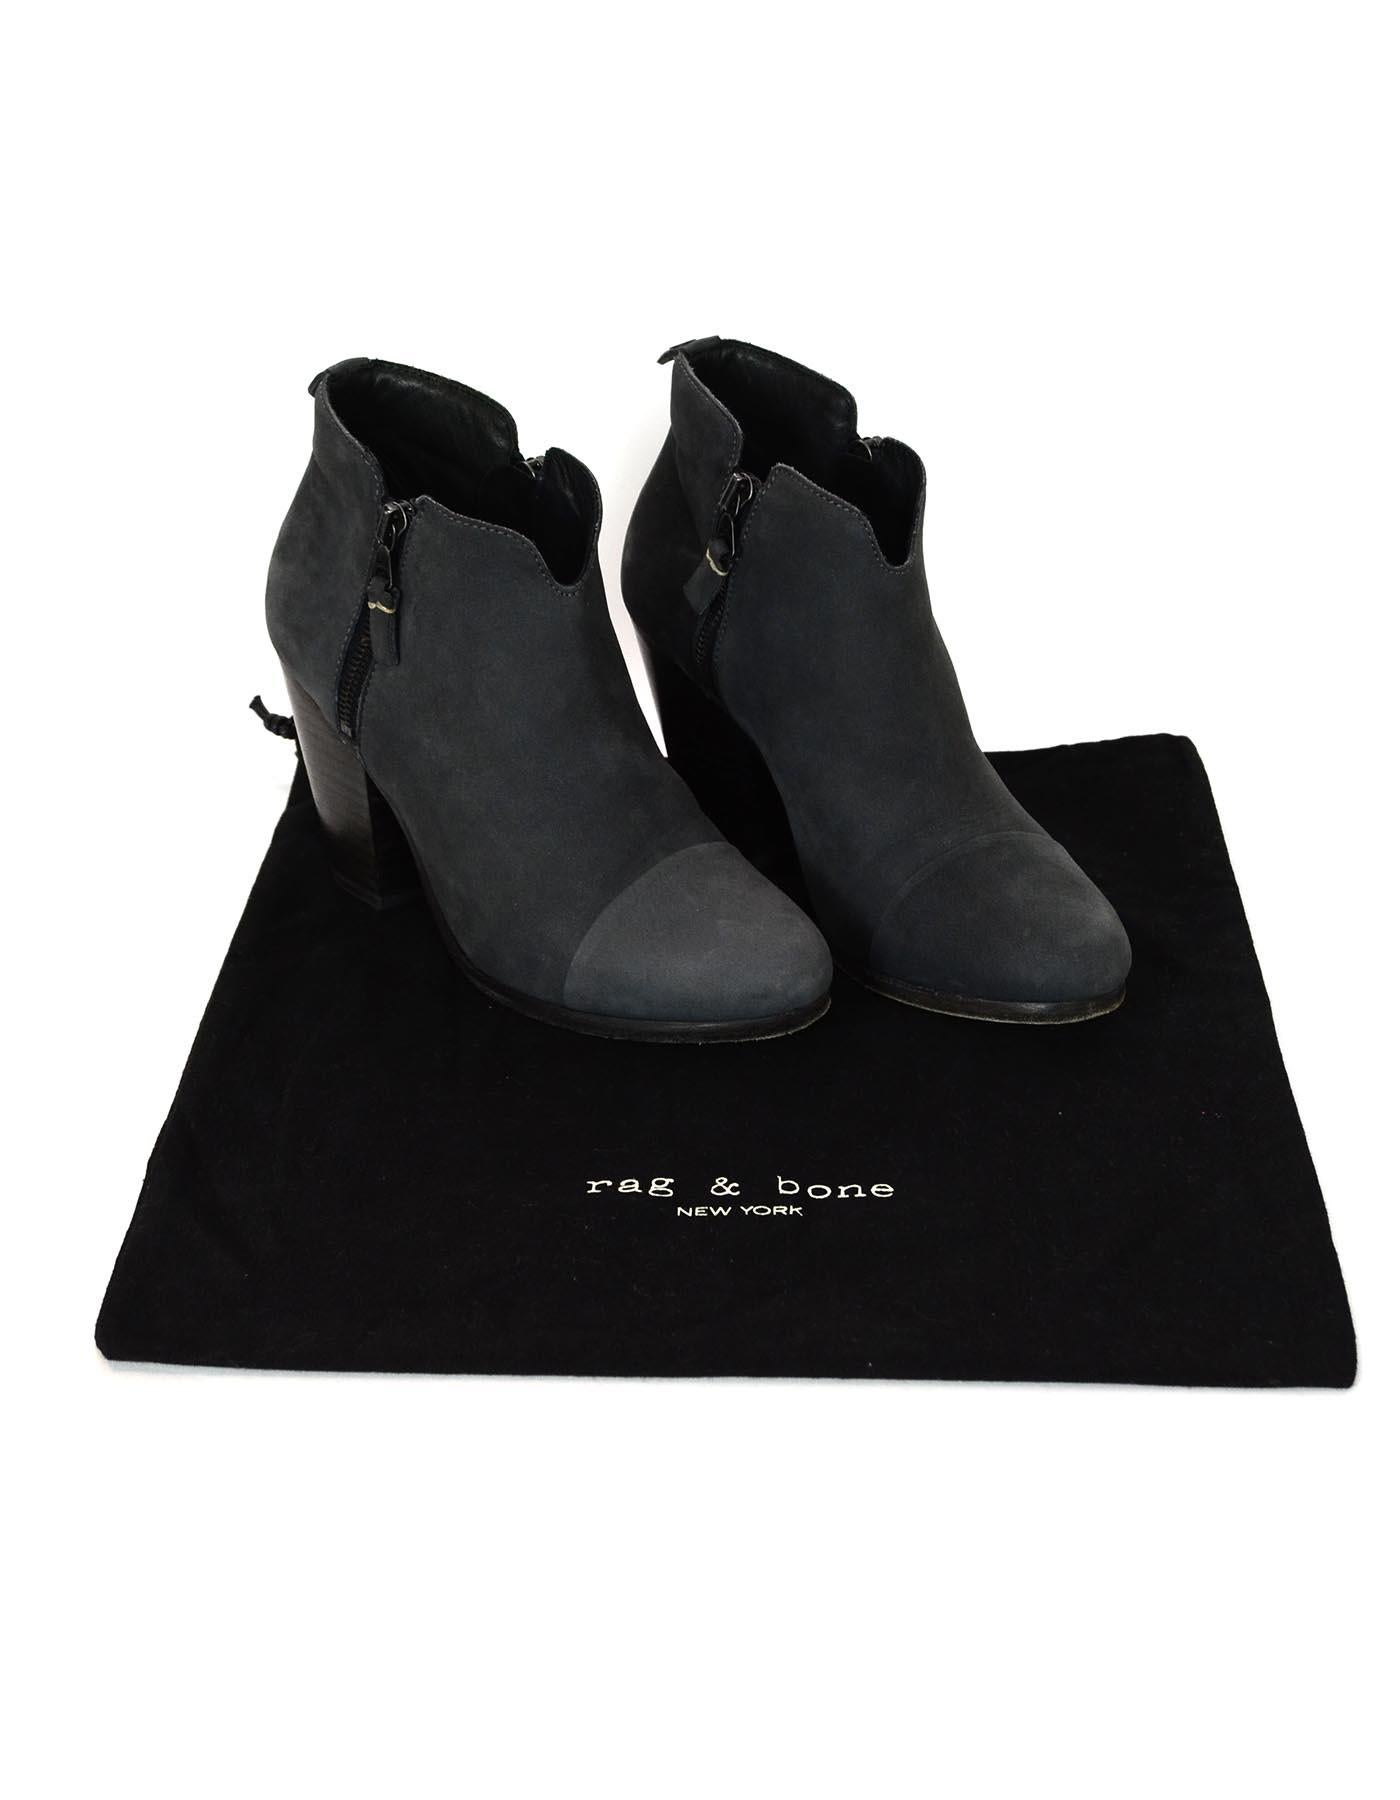 Rag & Bone Grey Suede Ankle Booties Sz 38

Made In: U.S.A
Color: Grey
Hardware: Antiqued silver/grey 
Materials: Suede
Closure/Opening: Two side zippers
Overall Condition: Excellent pre-owned condition with exception of minor scratching throughout